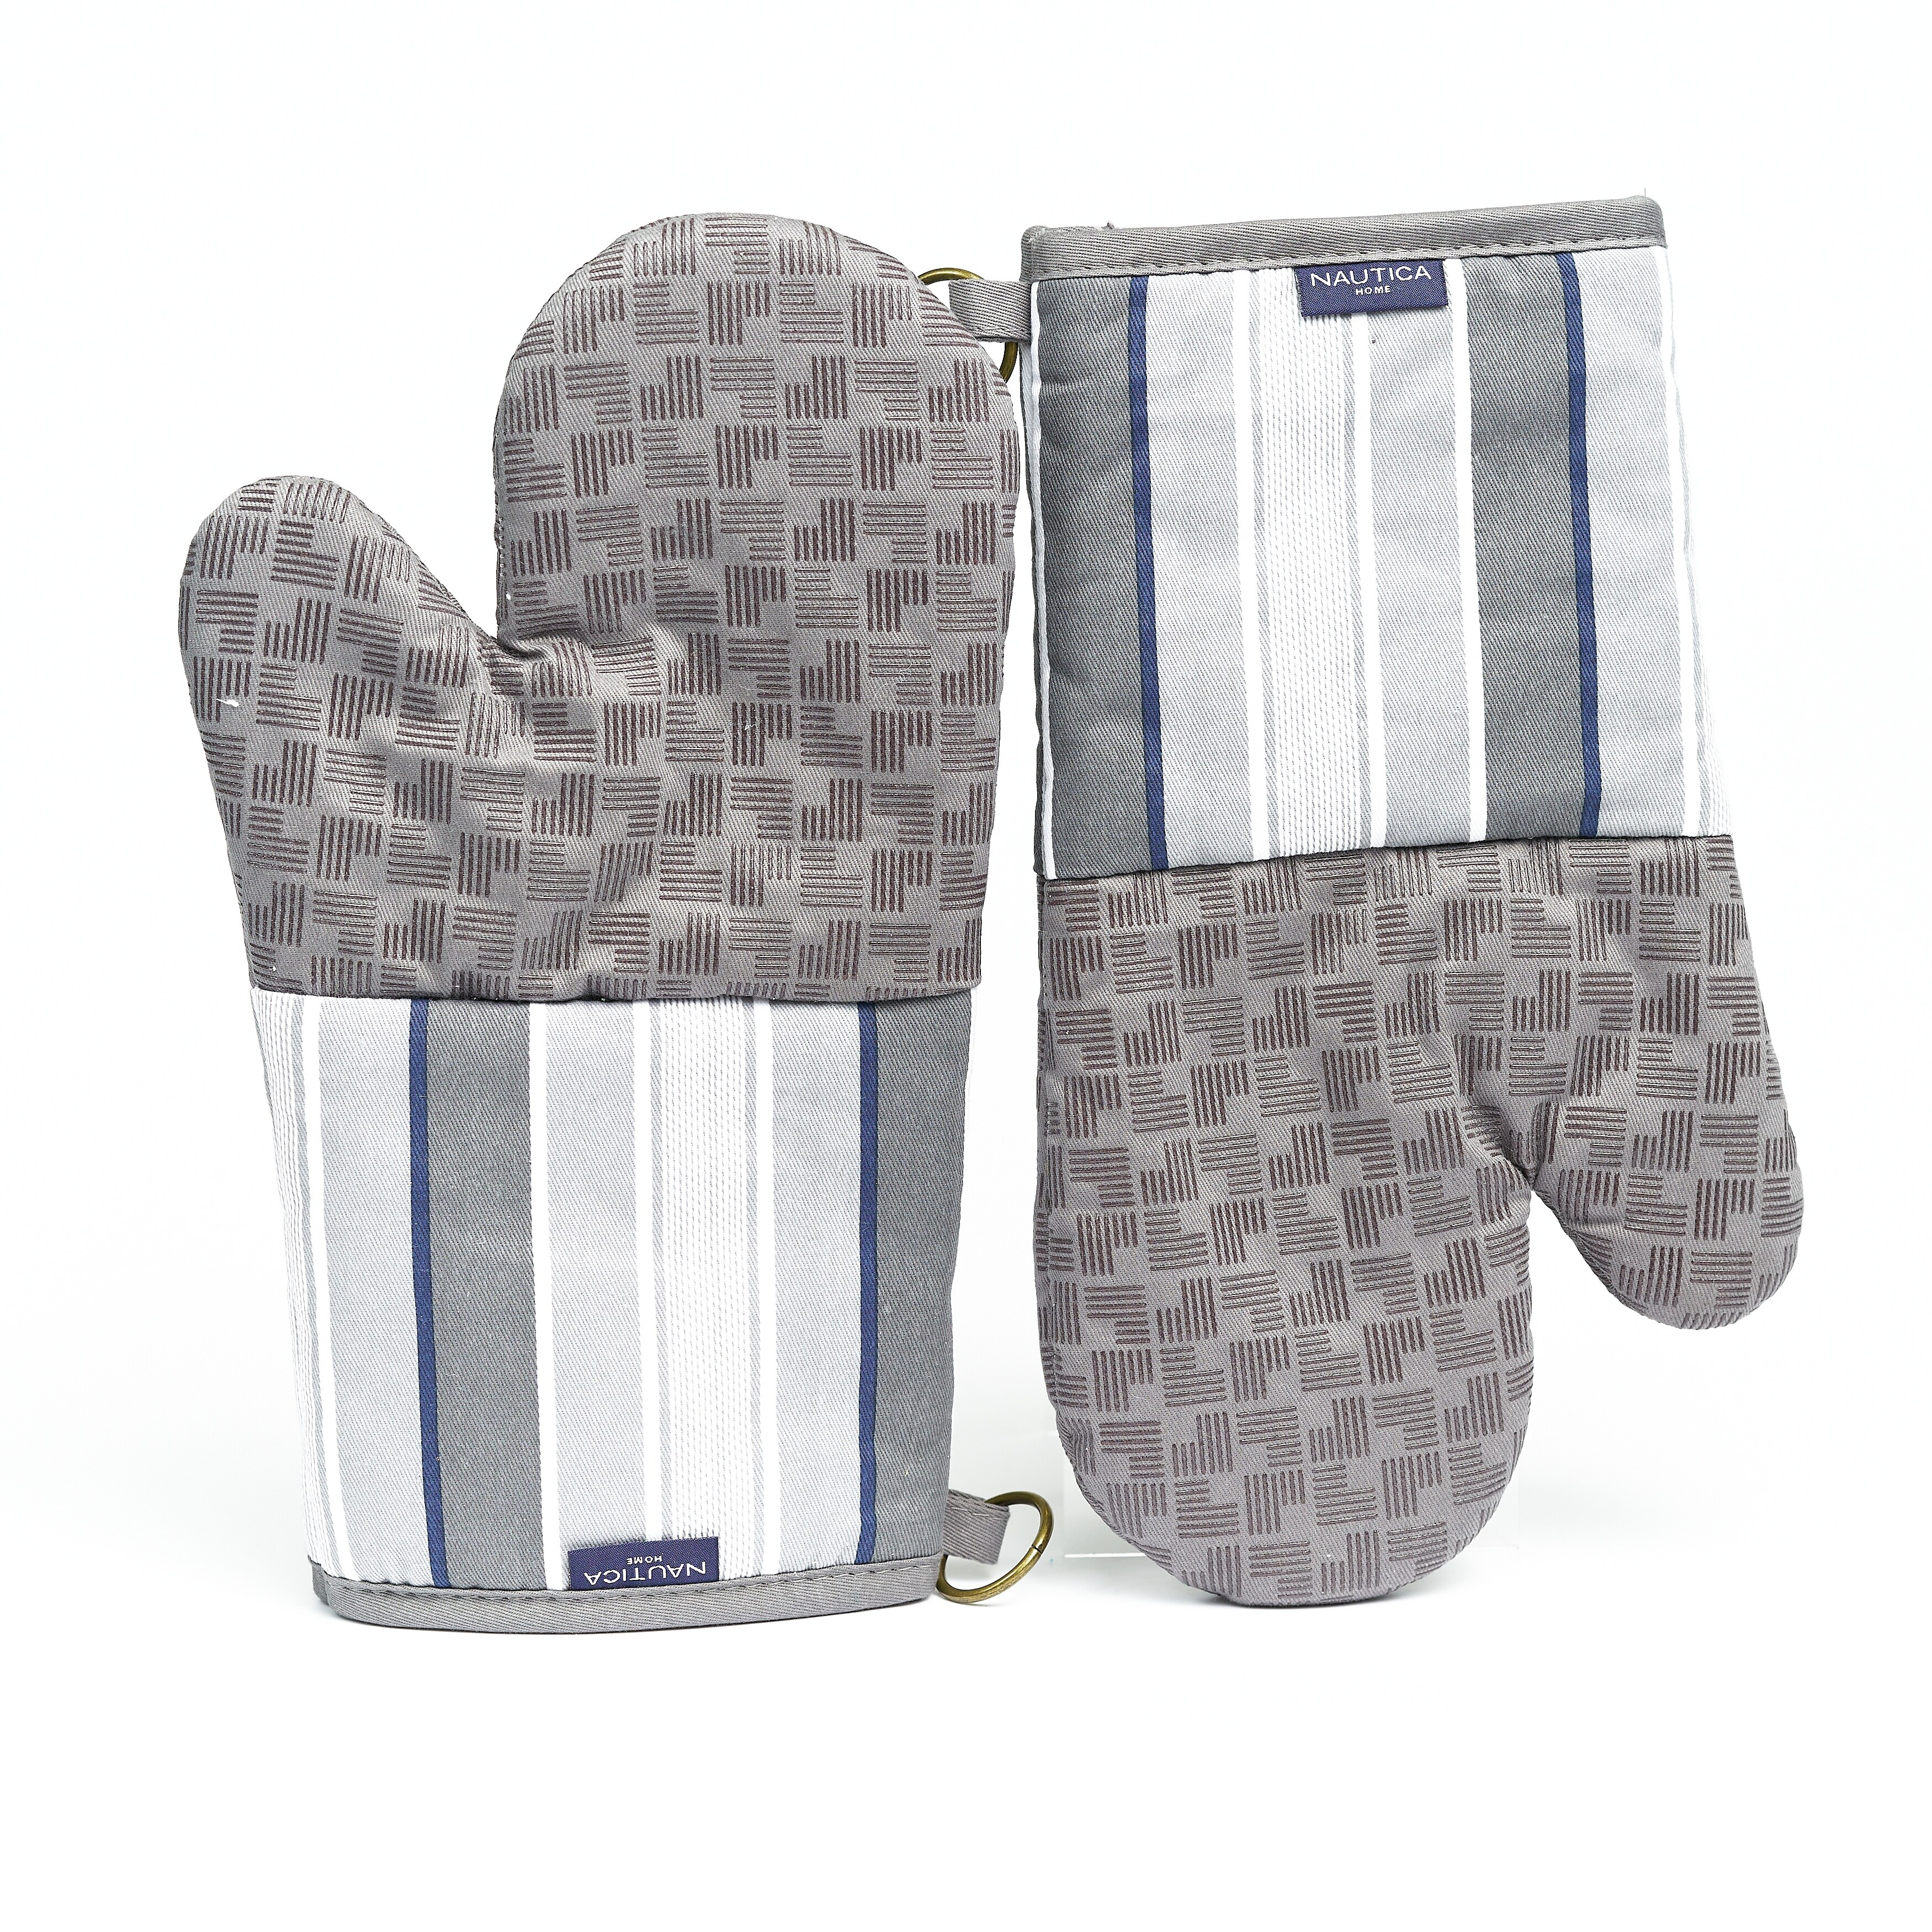 Nautica Home Navy Striped 100% Cotton Oven Mitts with Silicone Grip (Set of 2)